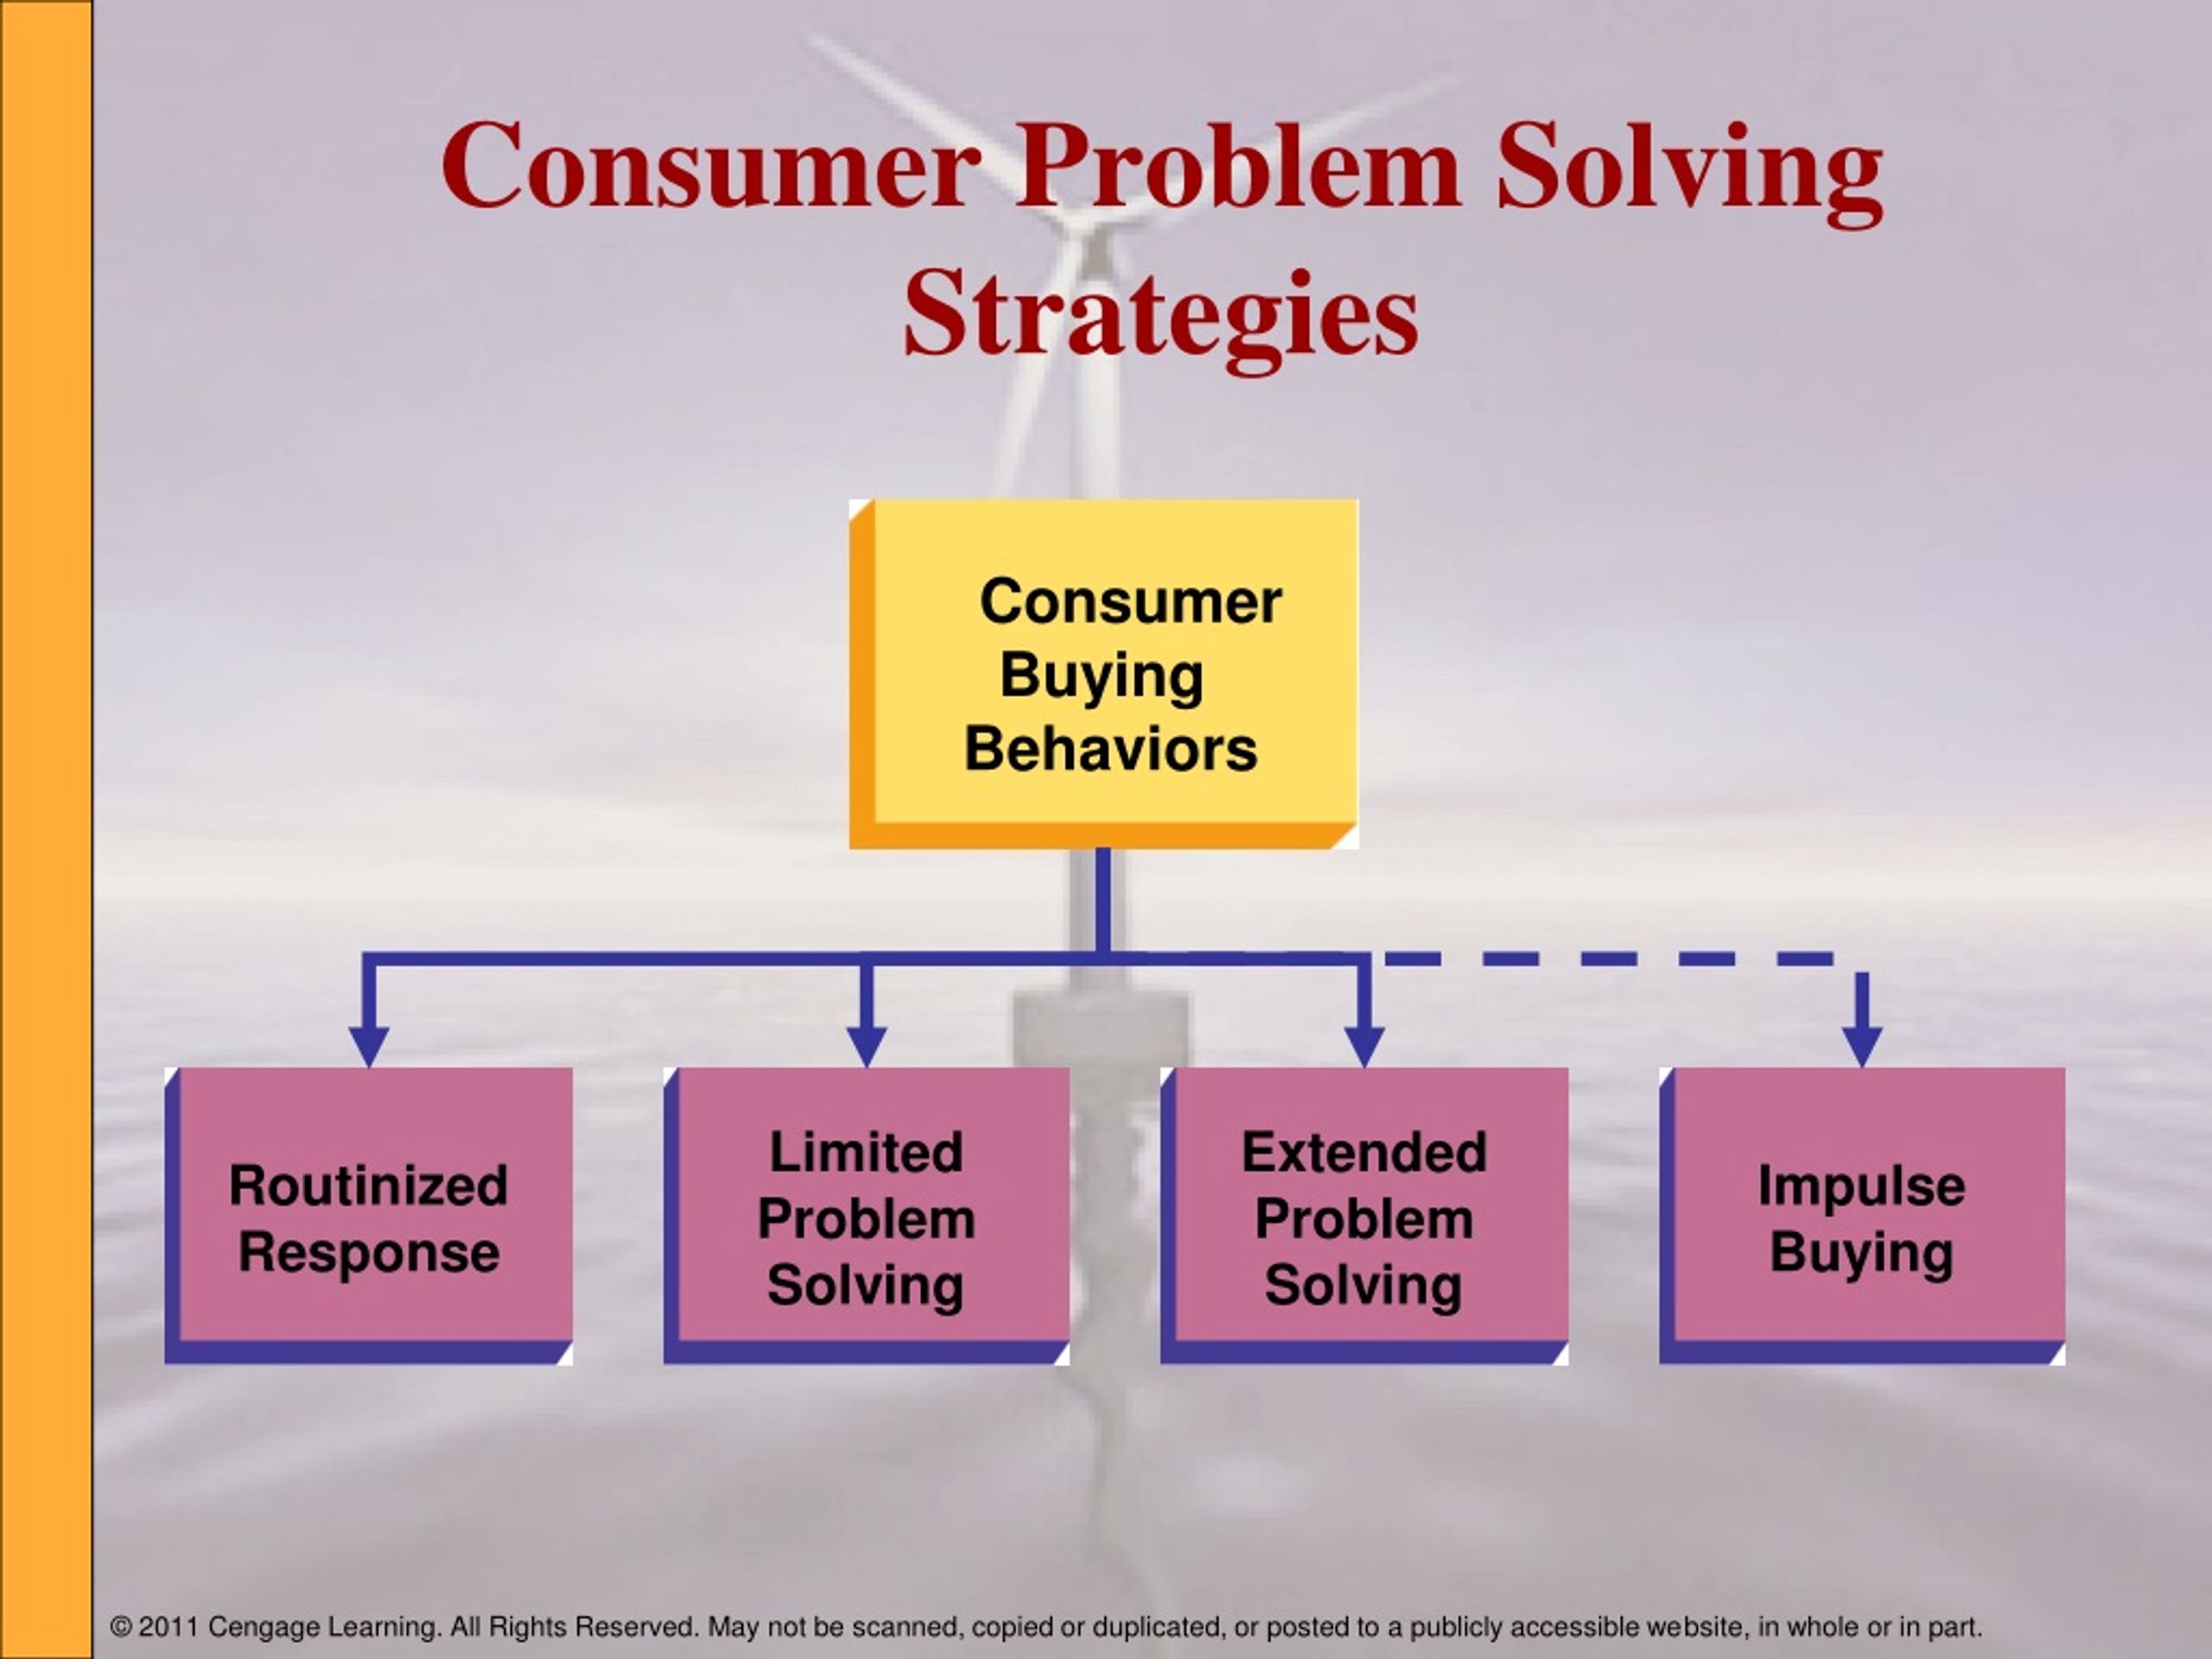 in an extended problem solving buying process the consumer